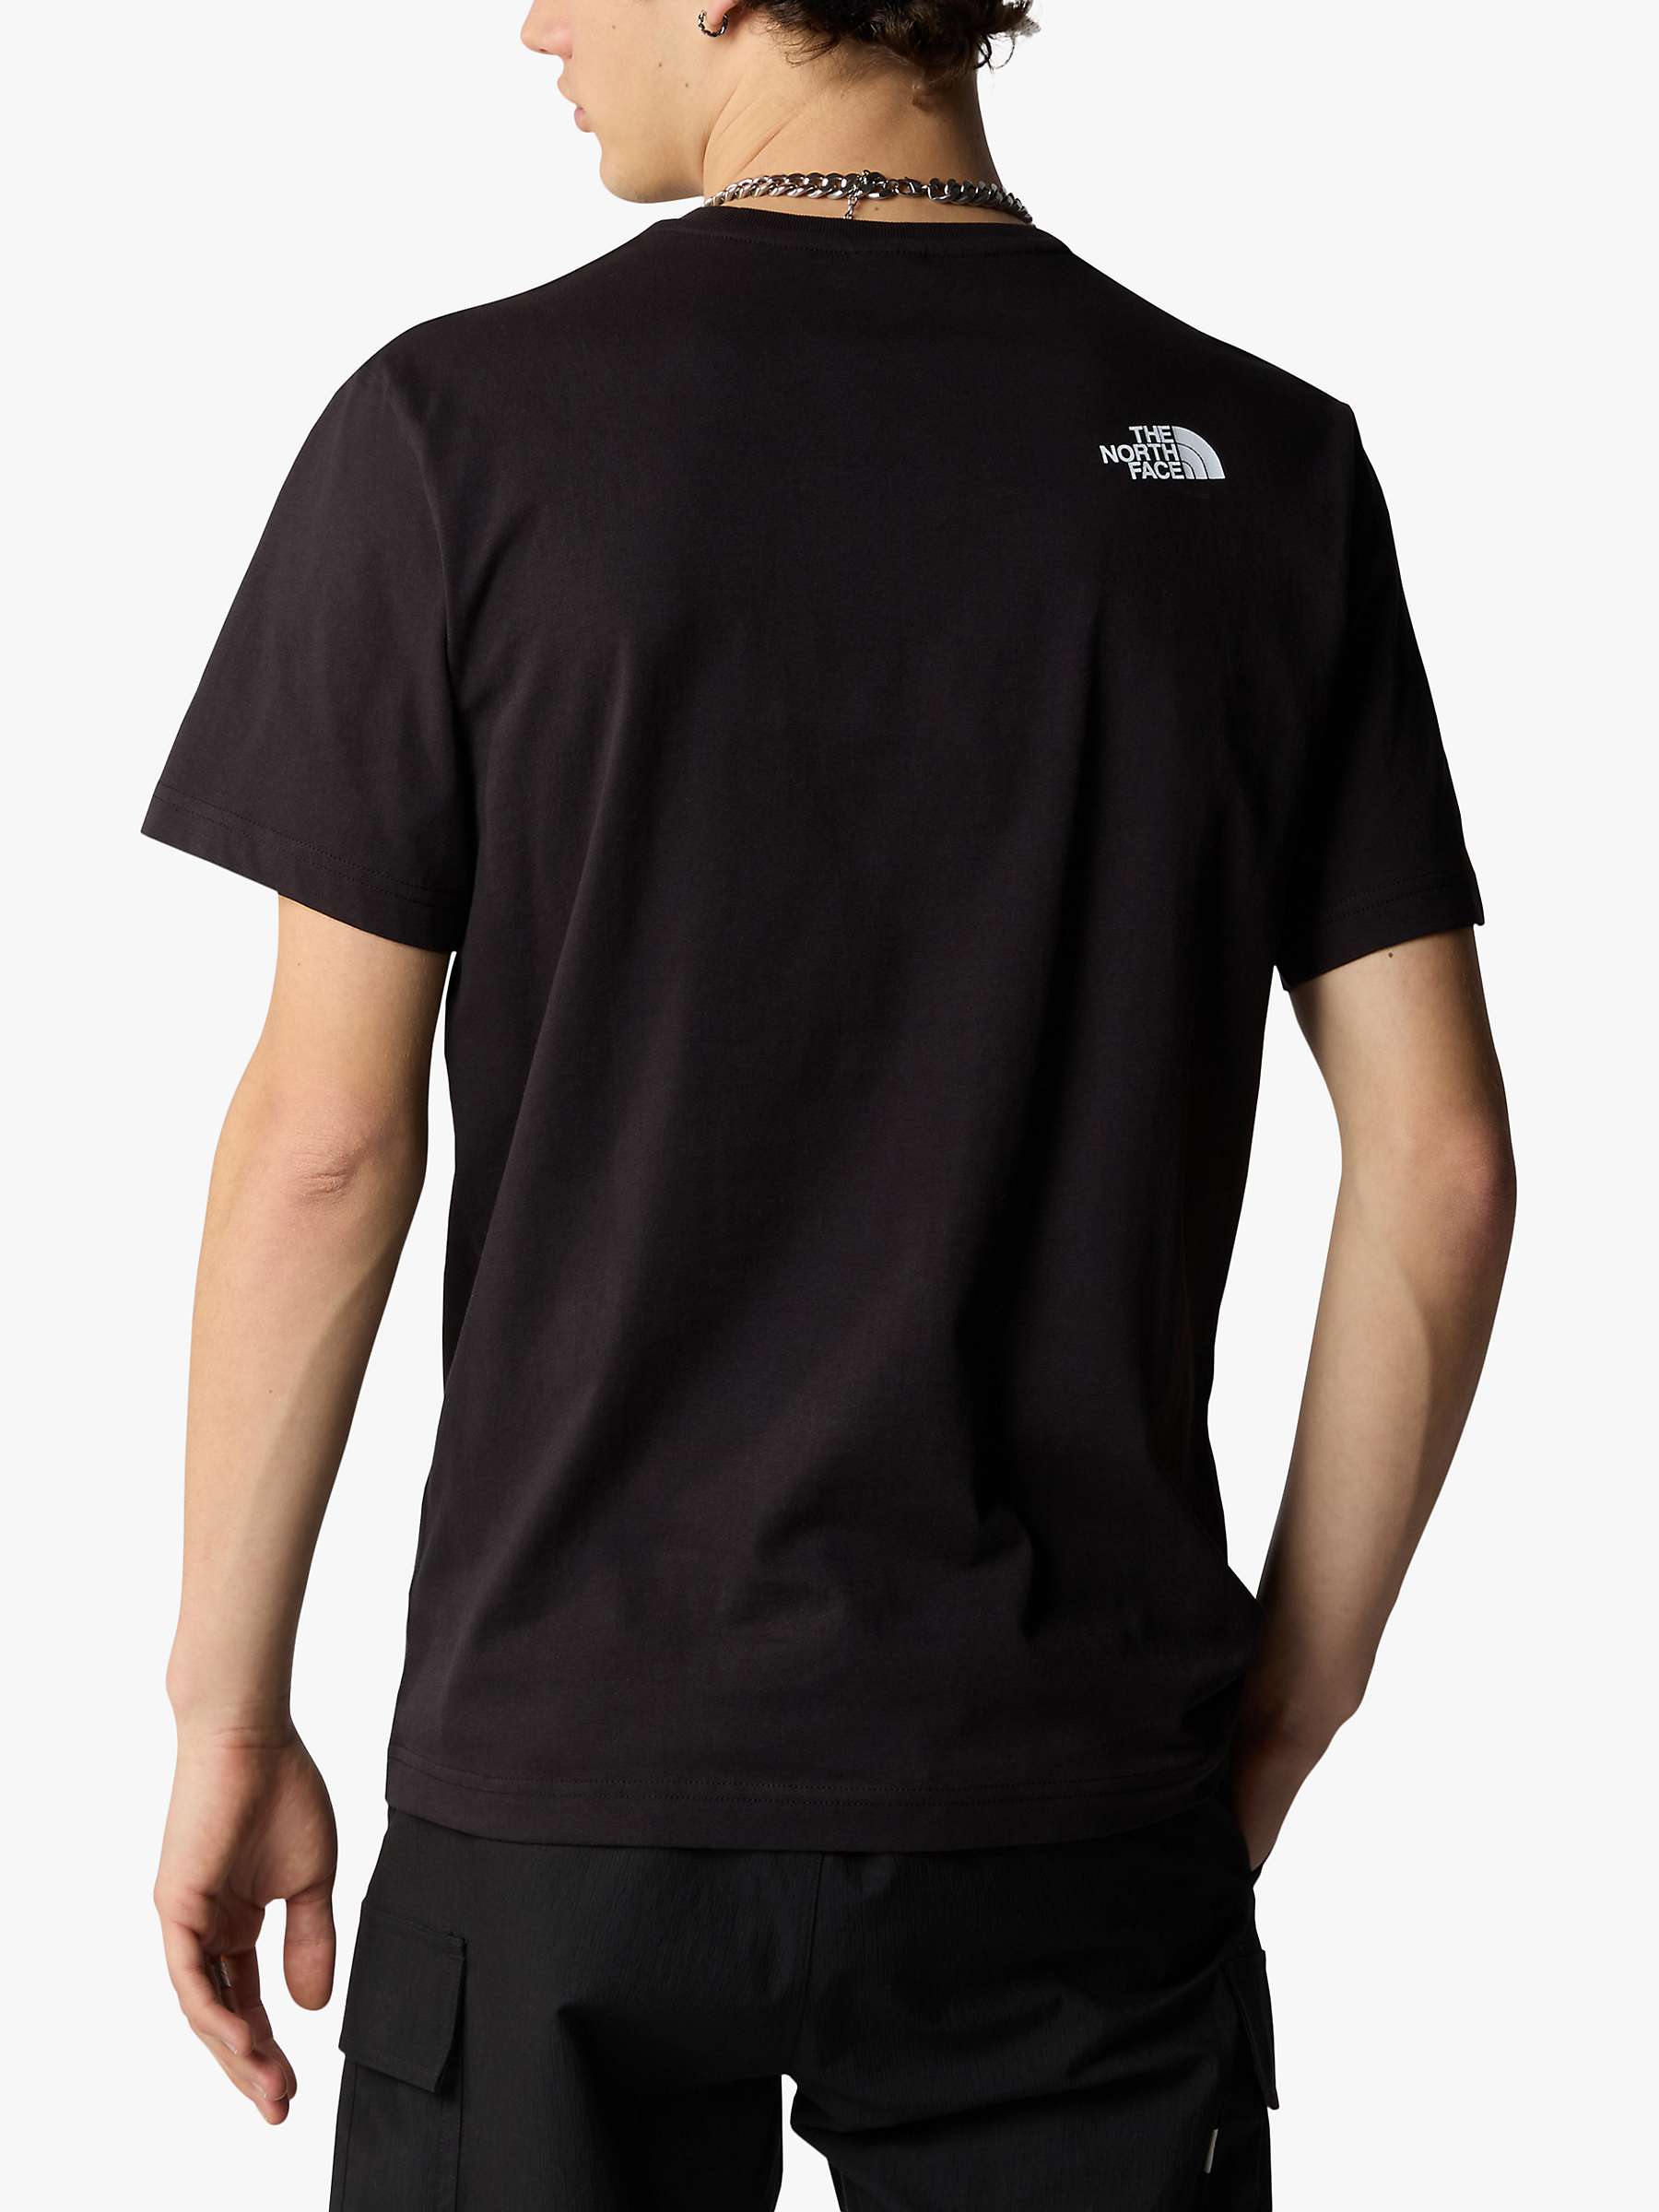 Buy The North Face Short Sleeve Wood Dome T-Shirt, Black Online at johnlewis.com